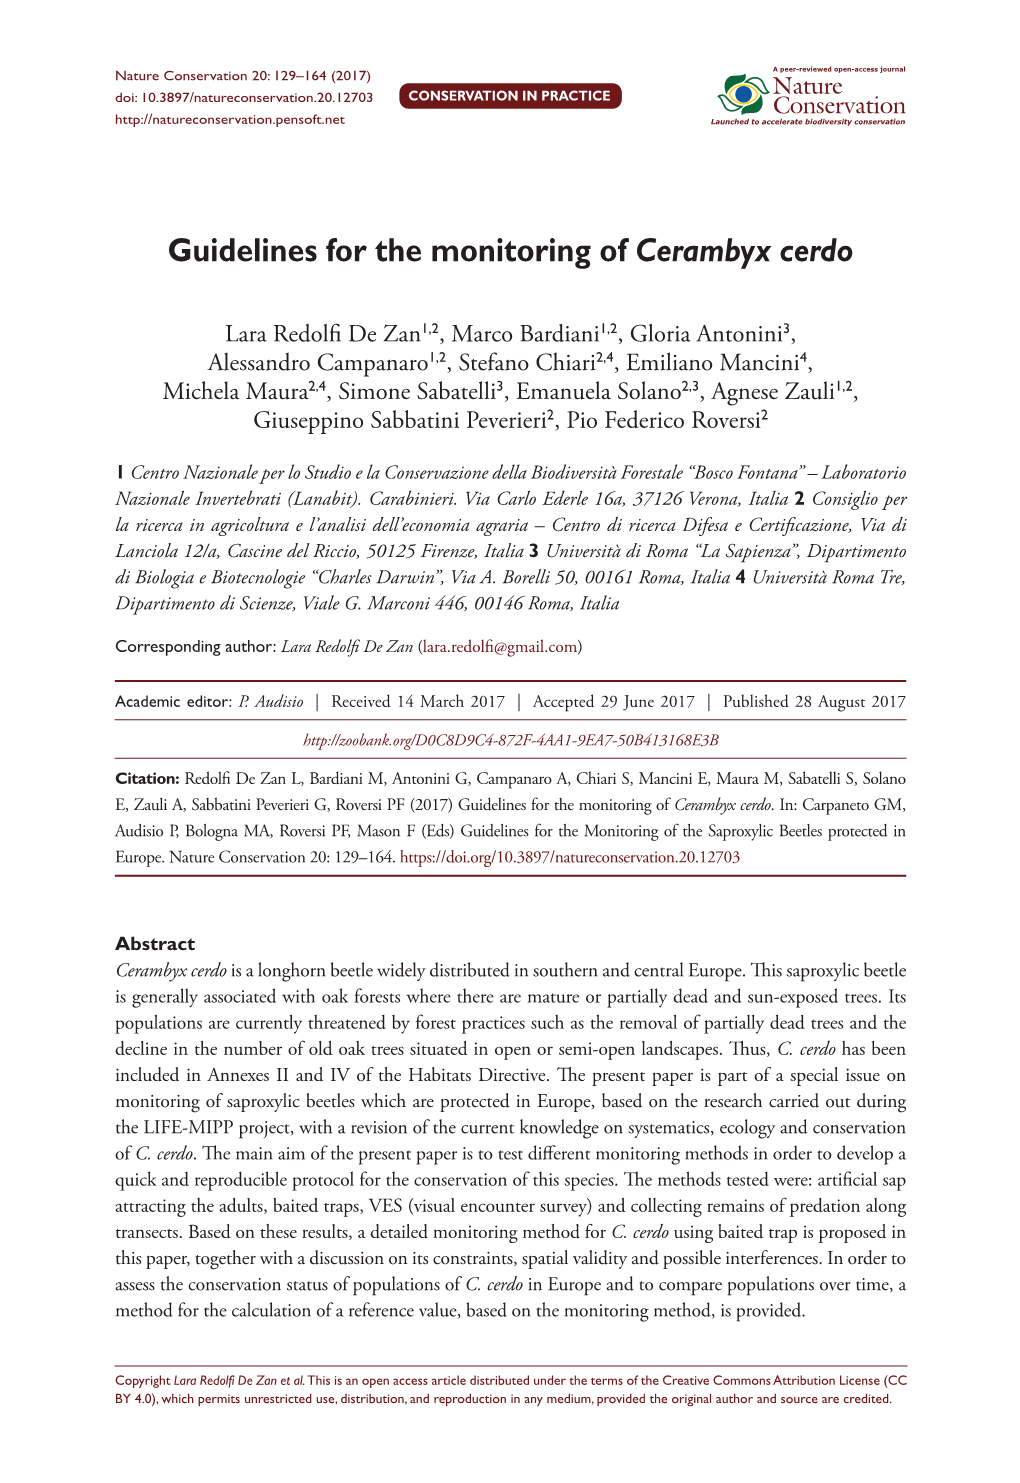 ﻿Guidelines for the Monitoring of Cerambyx Cerdo